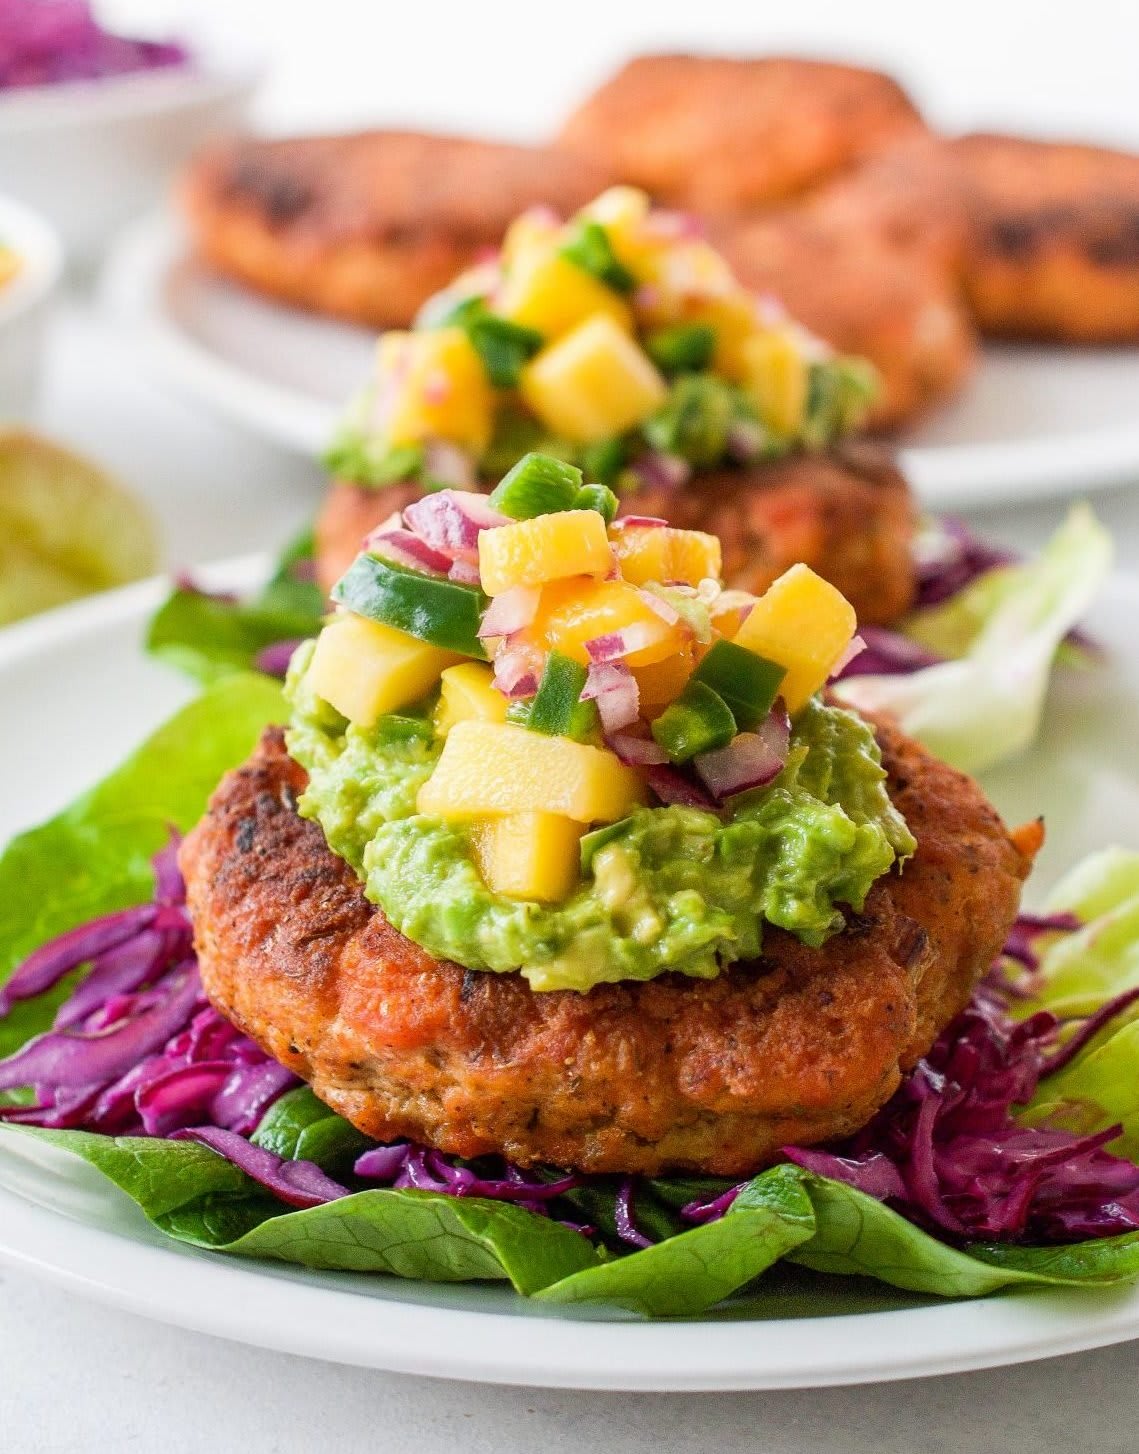 32 Low-Carb Burgers That Involve Keto Buns, Lettuce Wraps and Yes, Burger Bombs